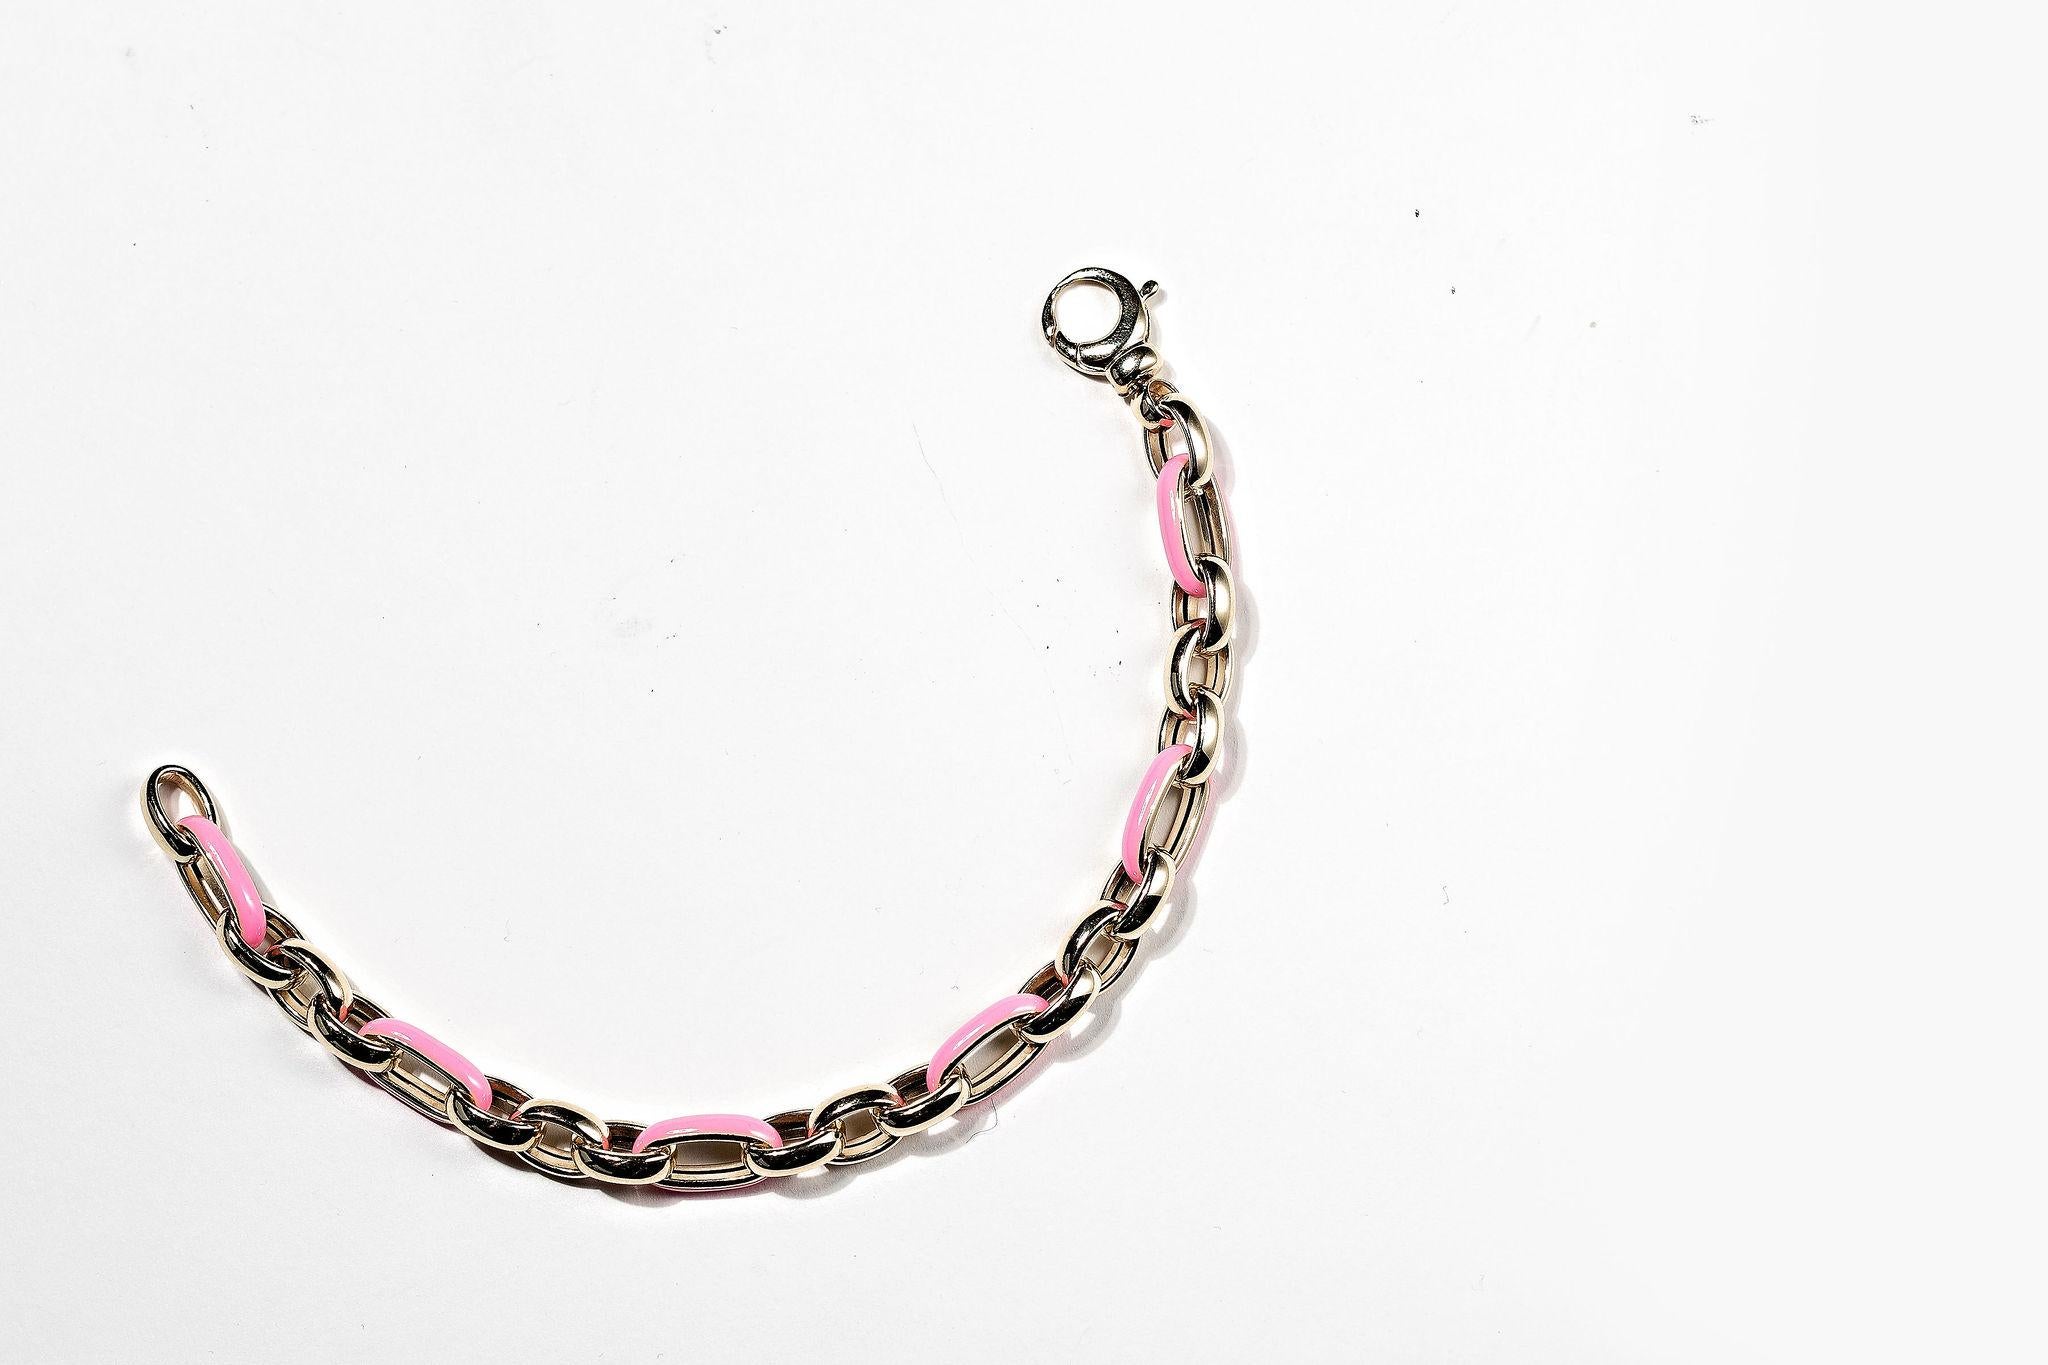 14k yellow gold Enamel Bracelet - Handmade in Italy 

Metal: 14k yellow gold & Pink  enamel

Size of links: Large link 8mm & small link 4mm

Size: 7.50 inches 

Why pay designer prices when we all get ours from the same manufacturer in Italy? 

This